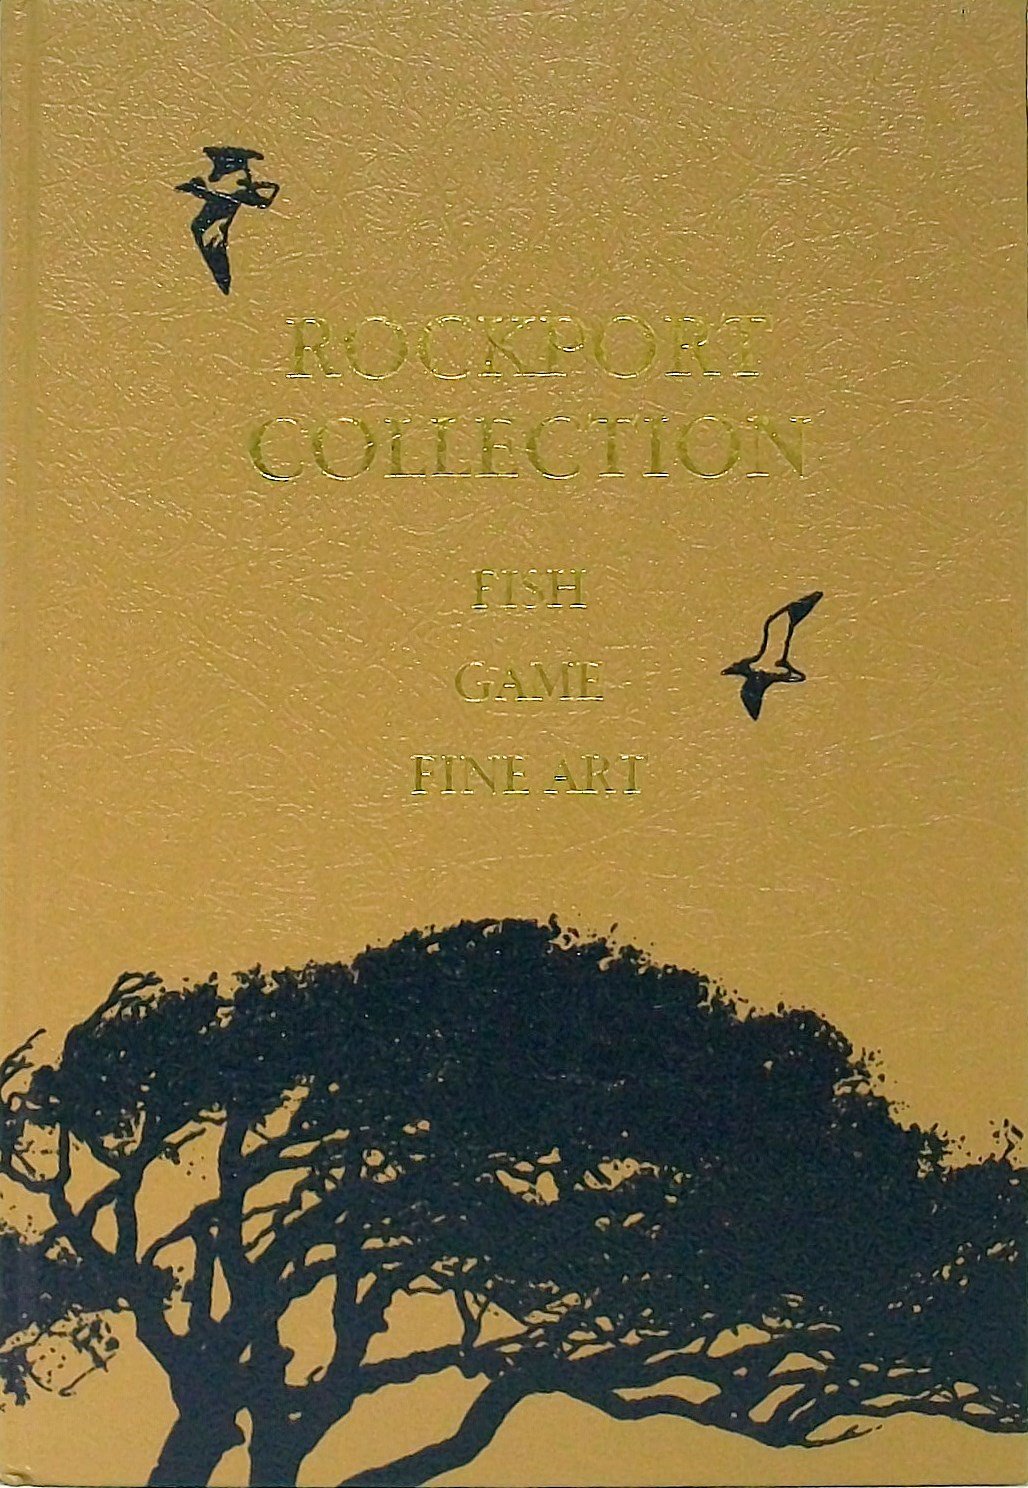 Rockport Collection Fish Game Fine Art Hardcover – Illustrated, January 1, 1986